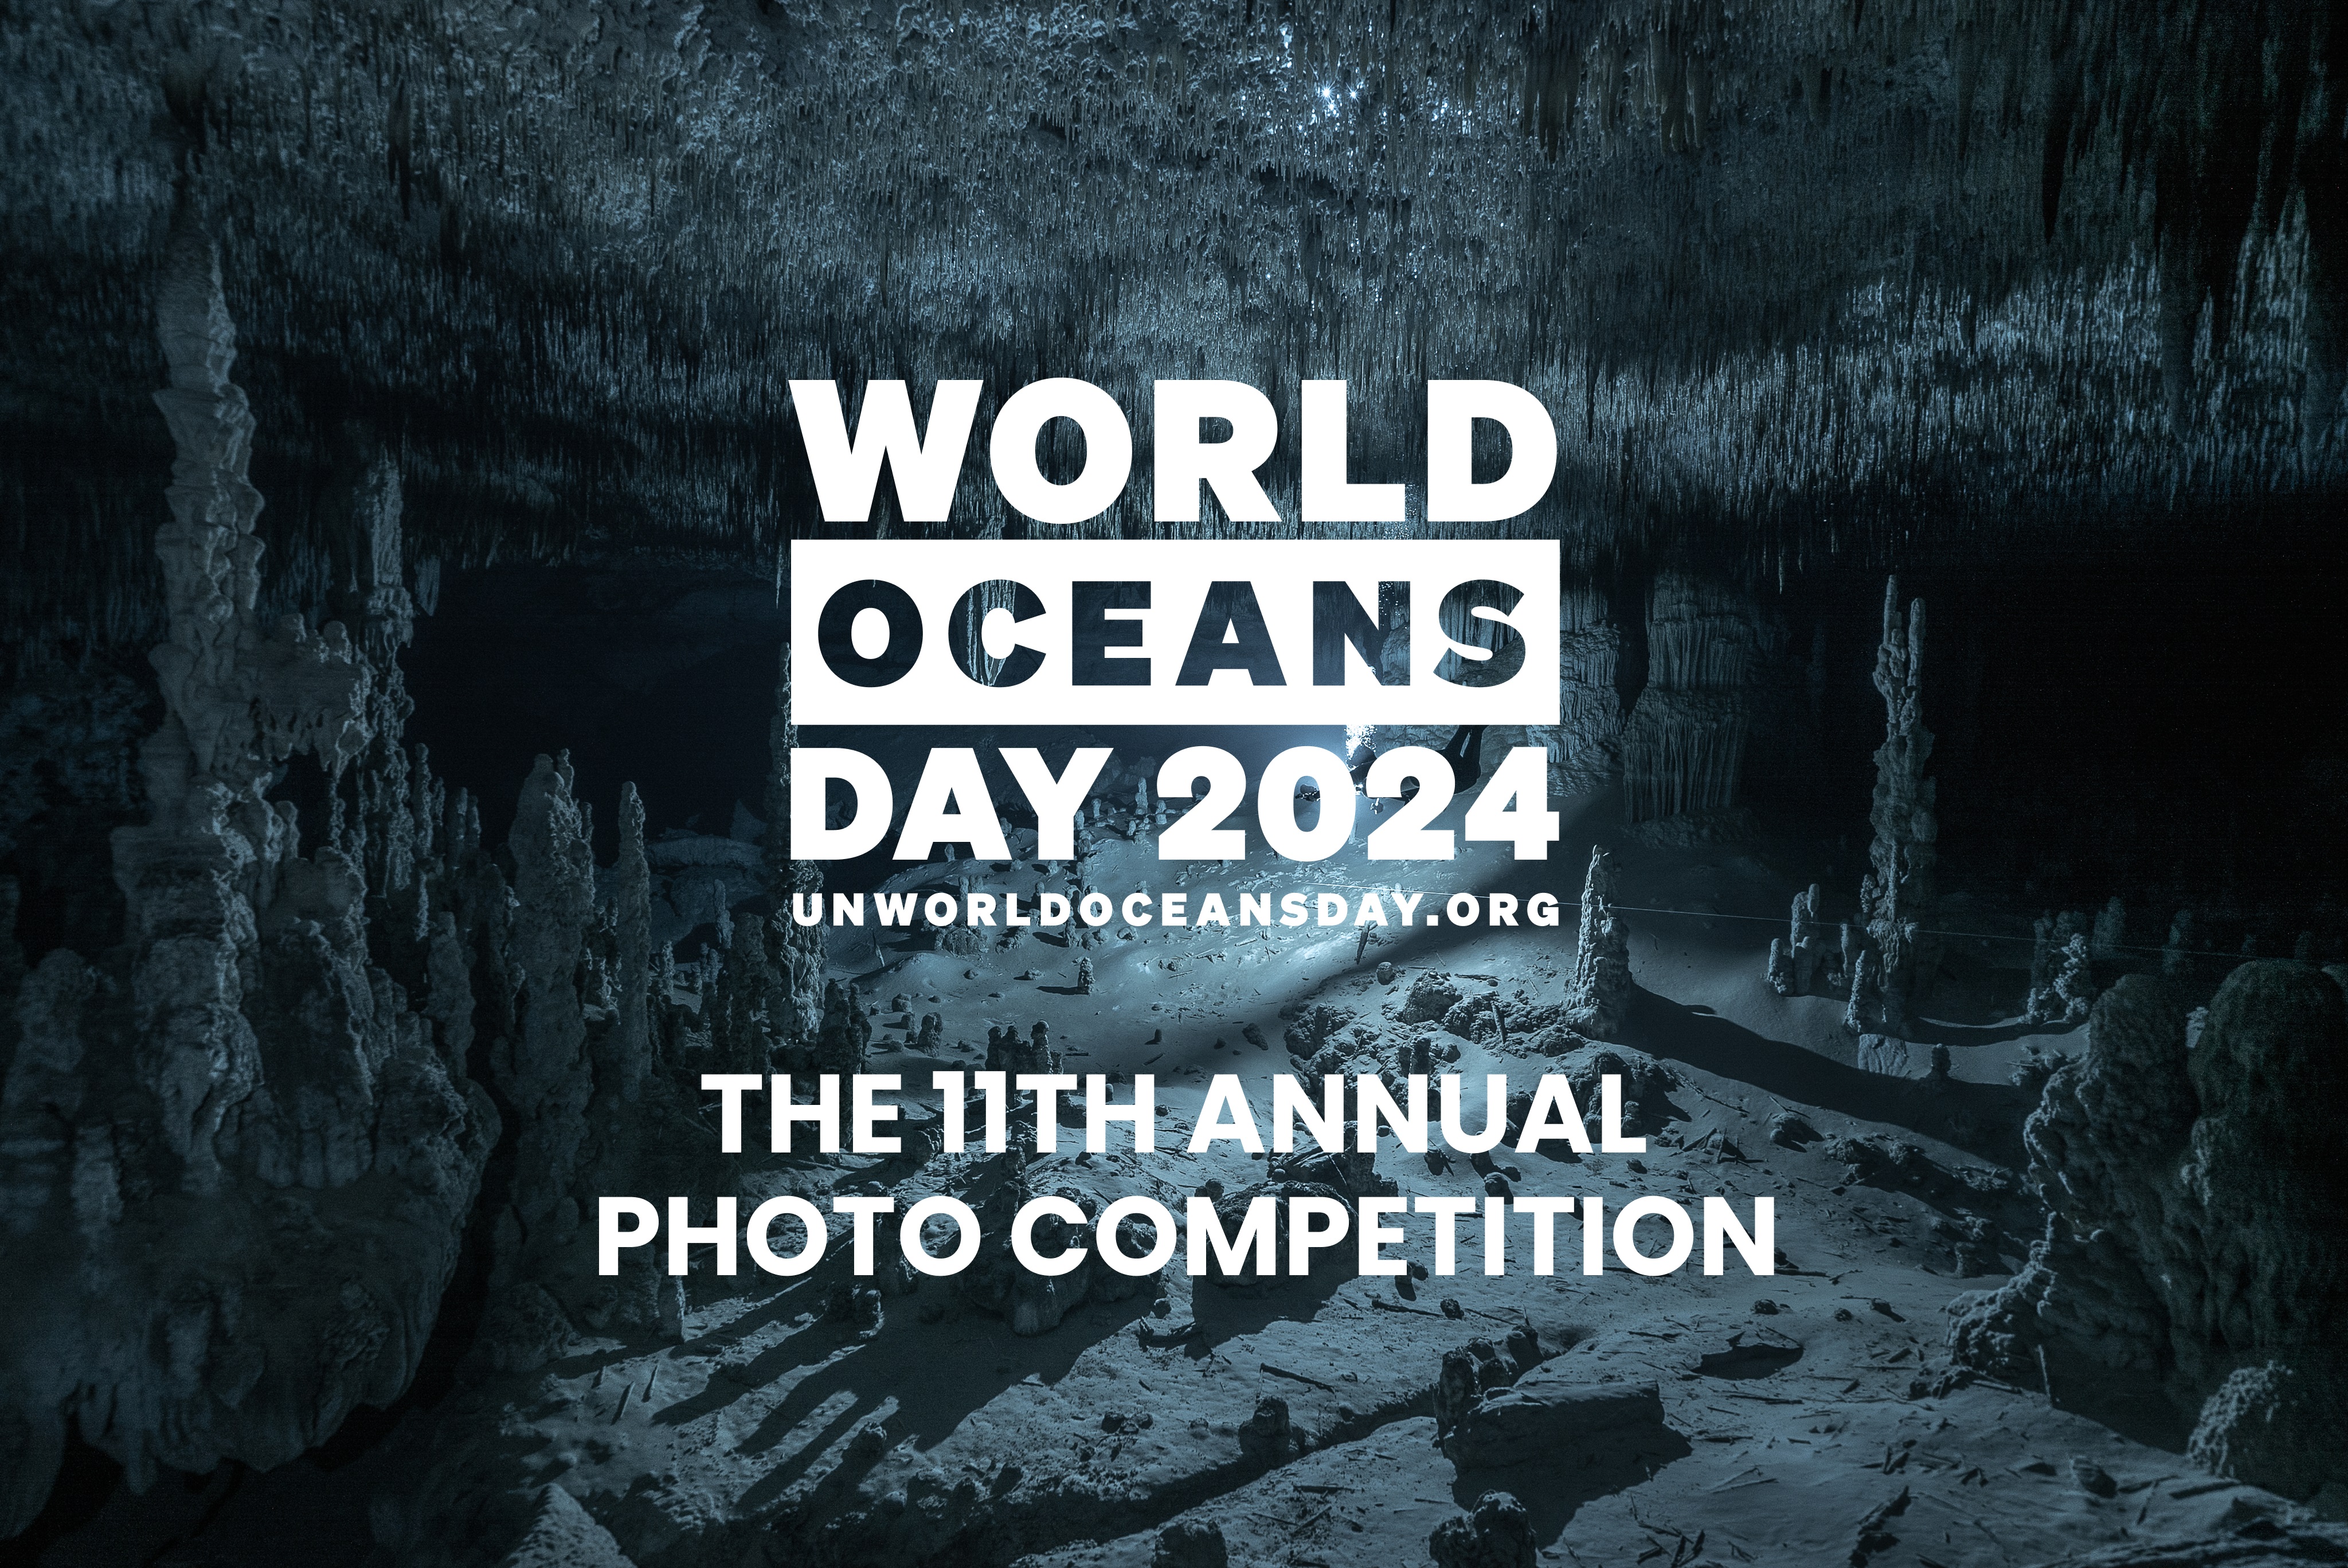 United Nations World Oceans Day